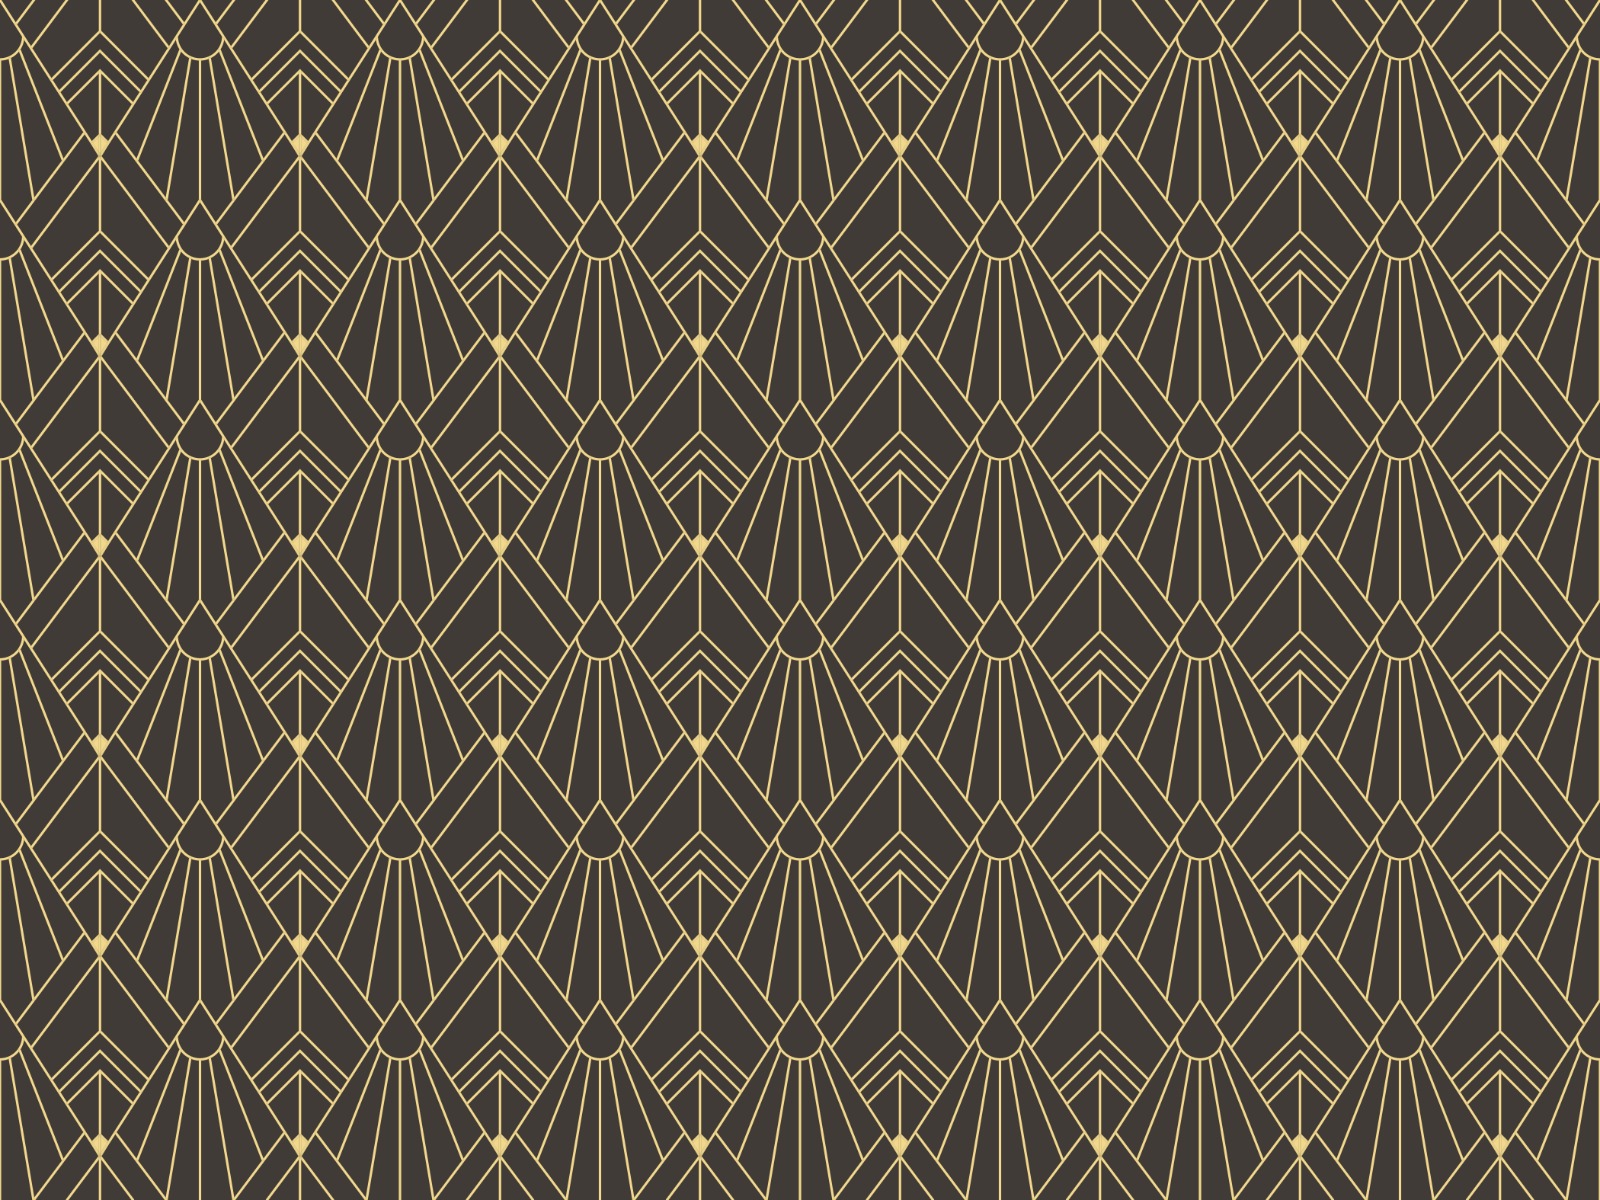 18 Art Deco Wallpaper Ideas  Decorating with 1920s Art Deco Wall Coverings